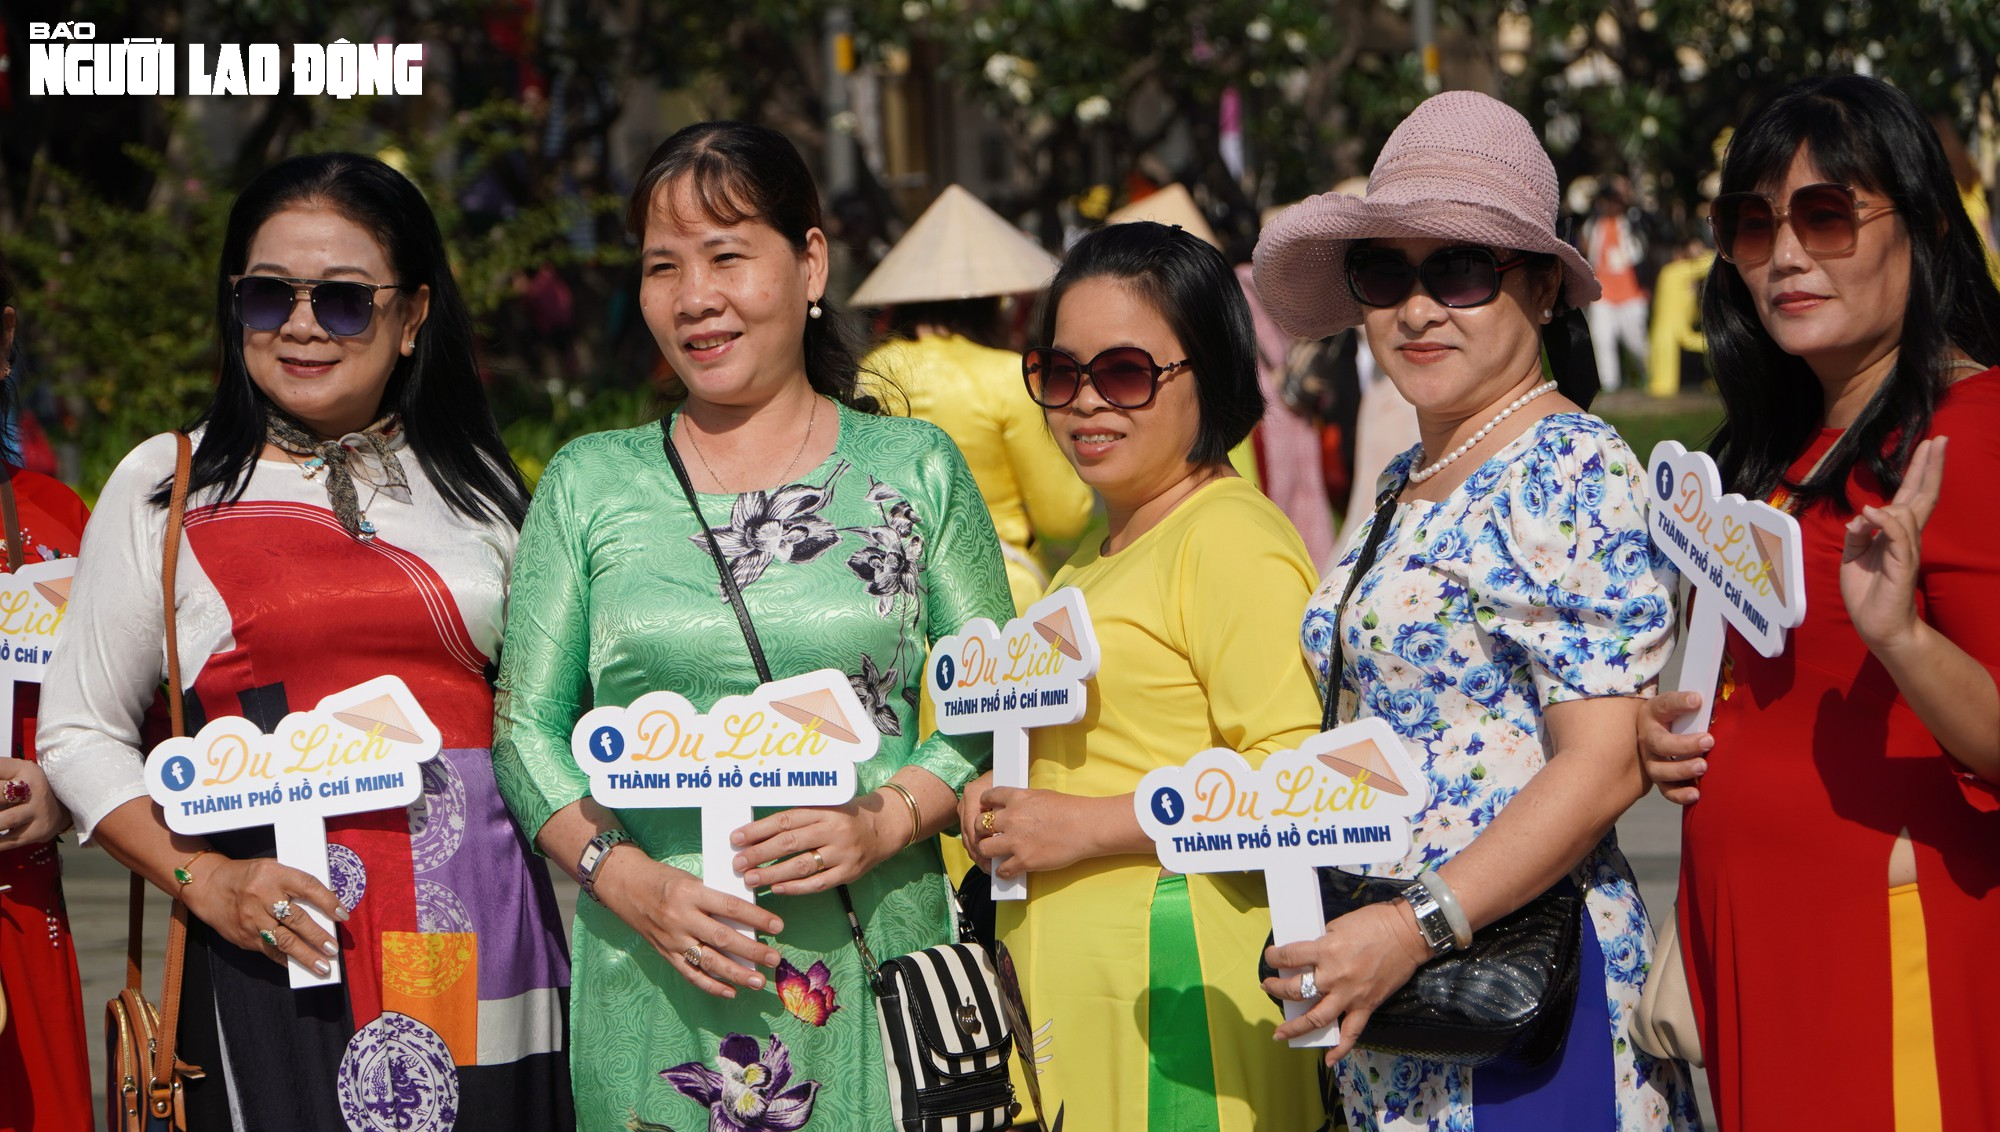 More than 3,000 people perform Ao Dai on the streets of Ho Chi Minh City - Photo 12.